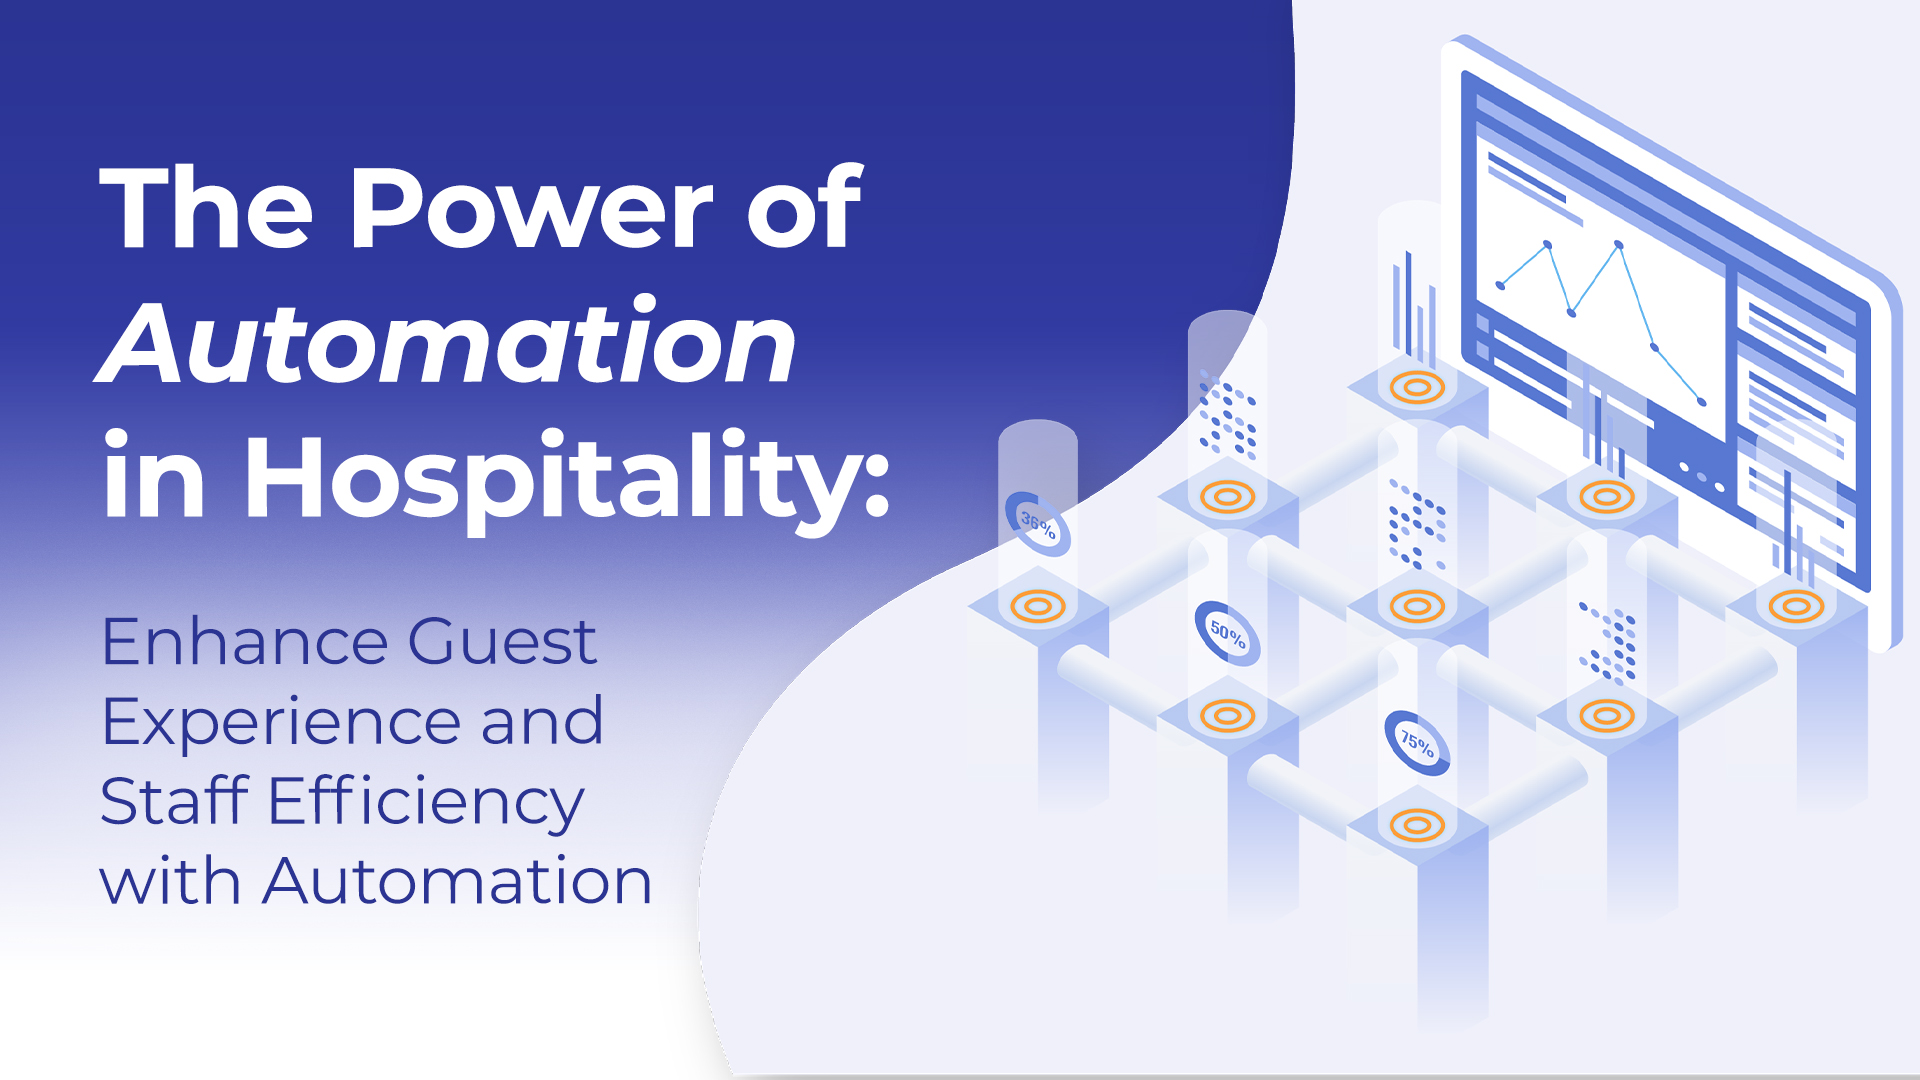 The Power of Automation in Hospitality